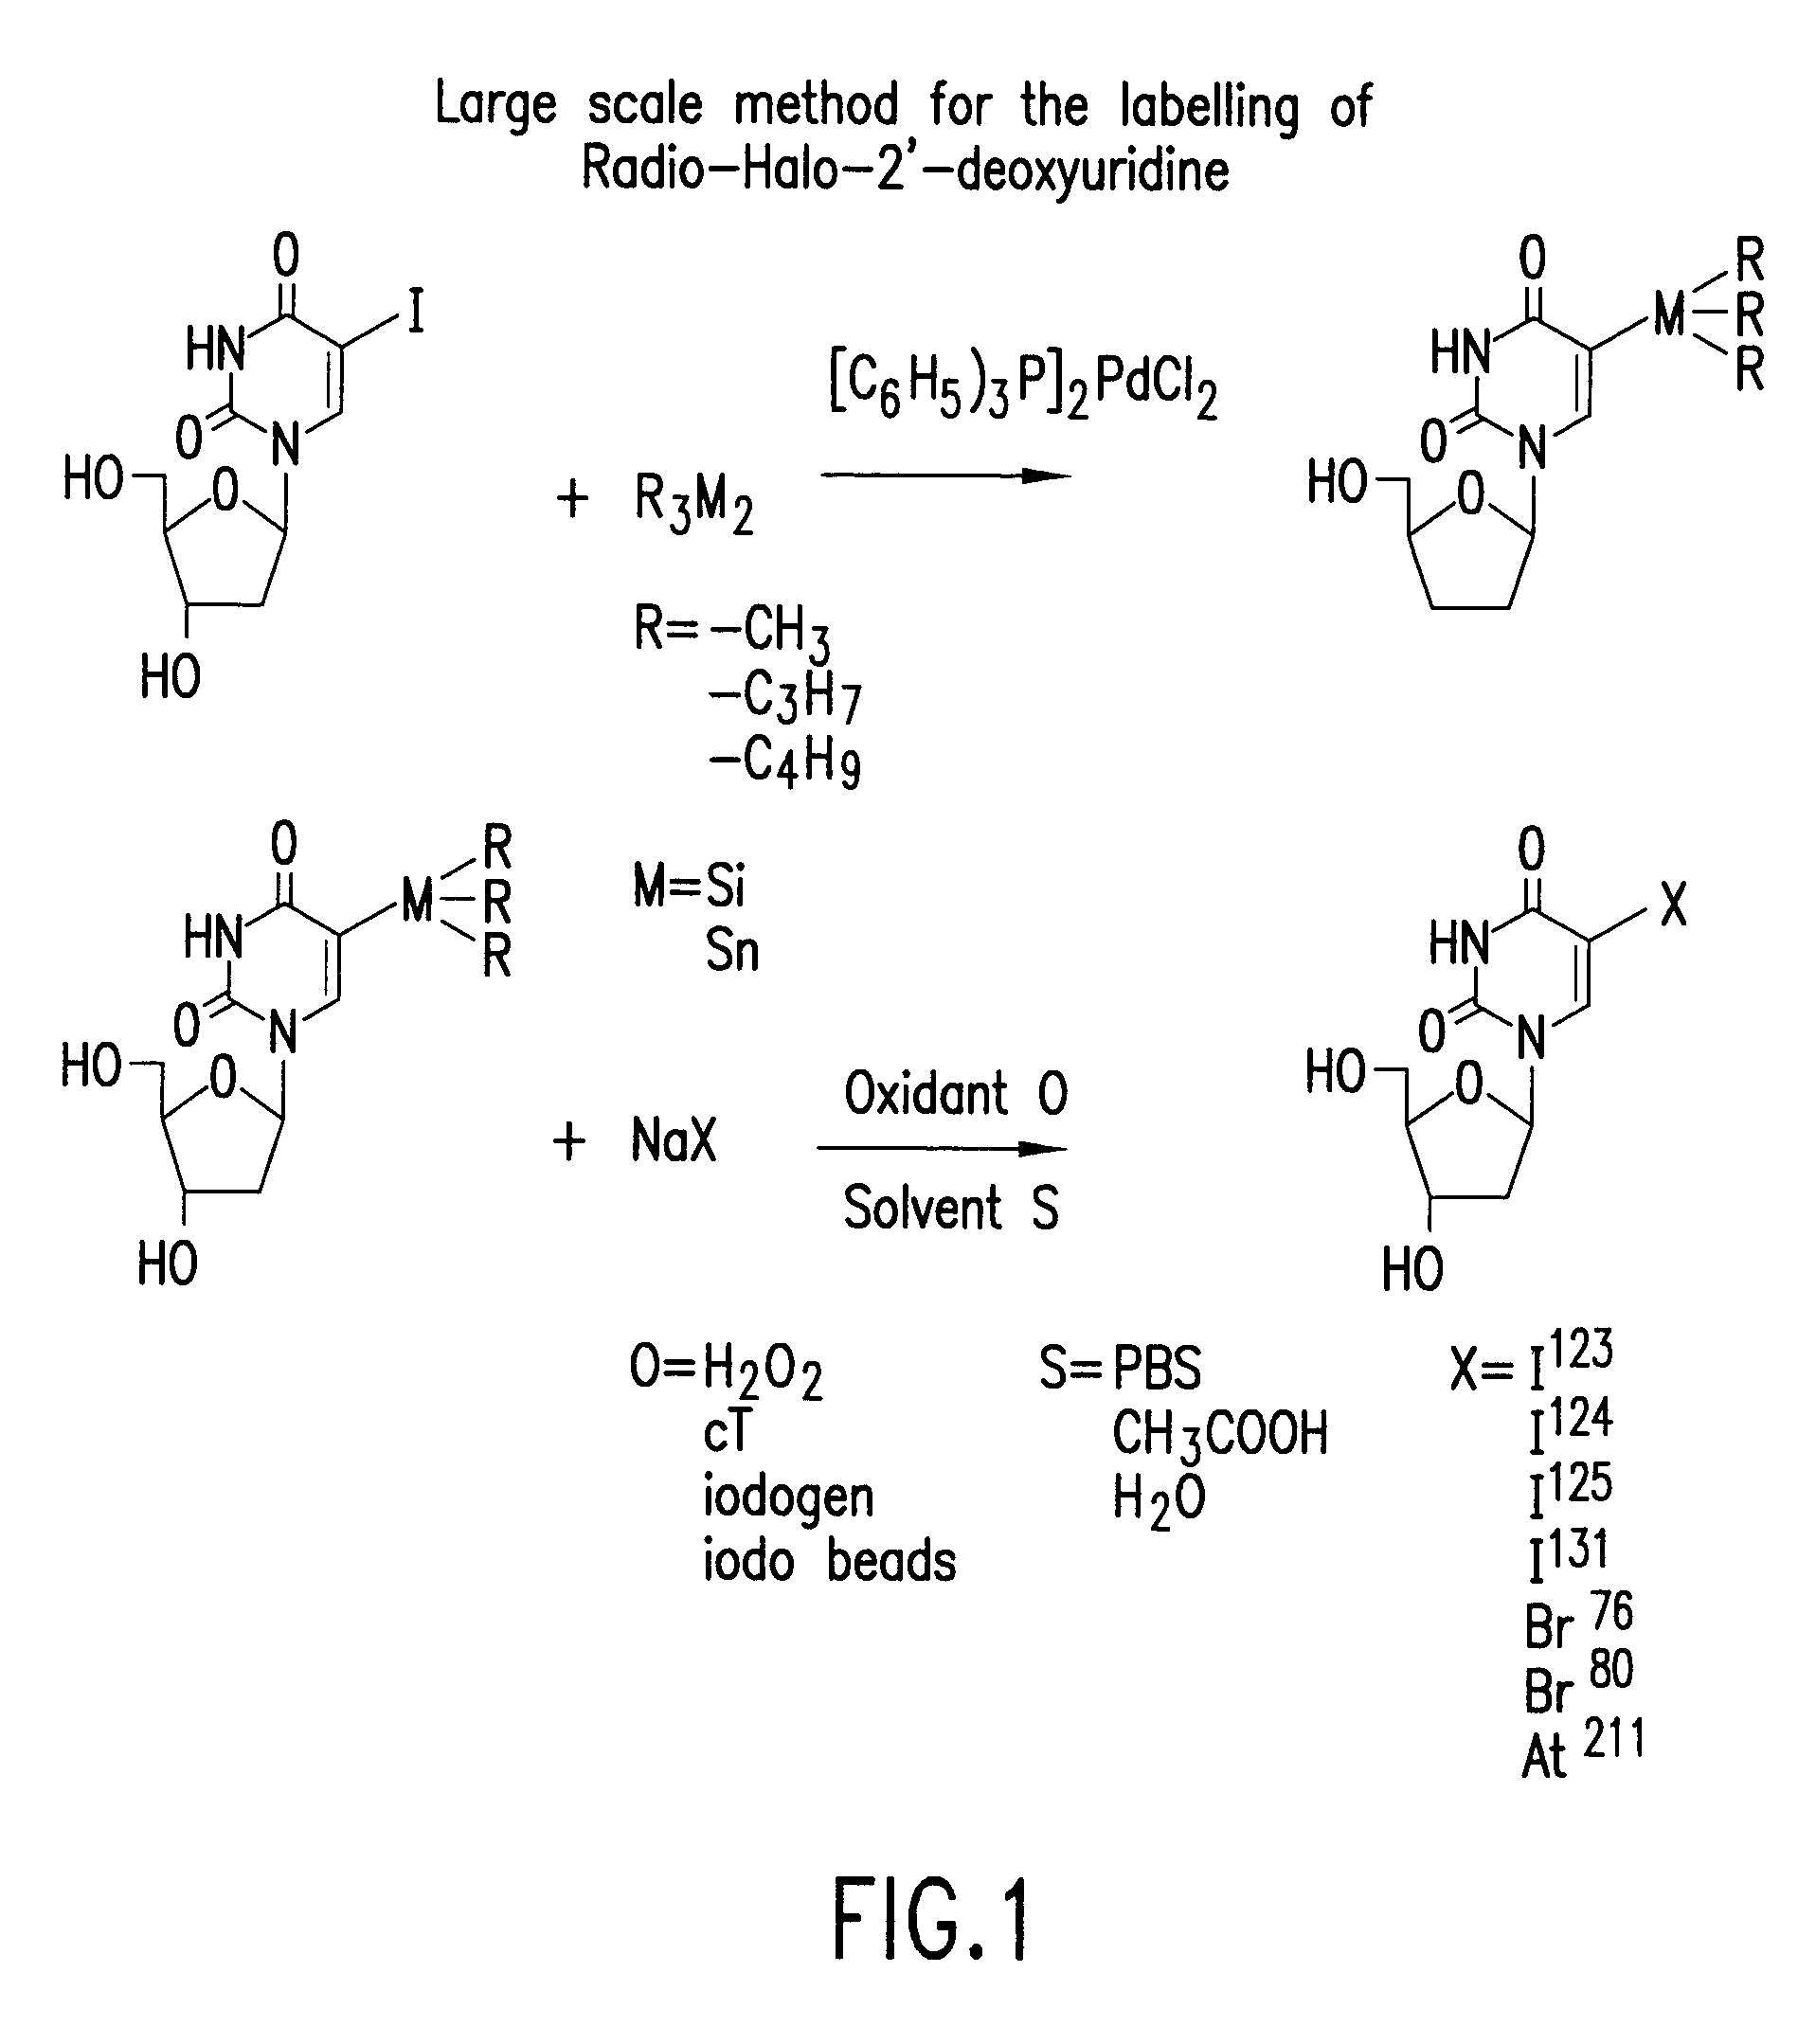 System and method for the large scale labeling of compounds with radiohalogens